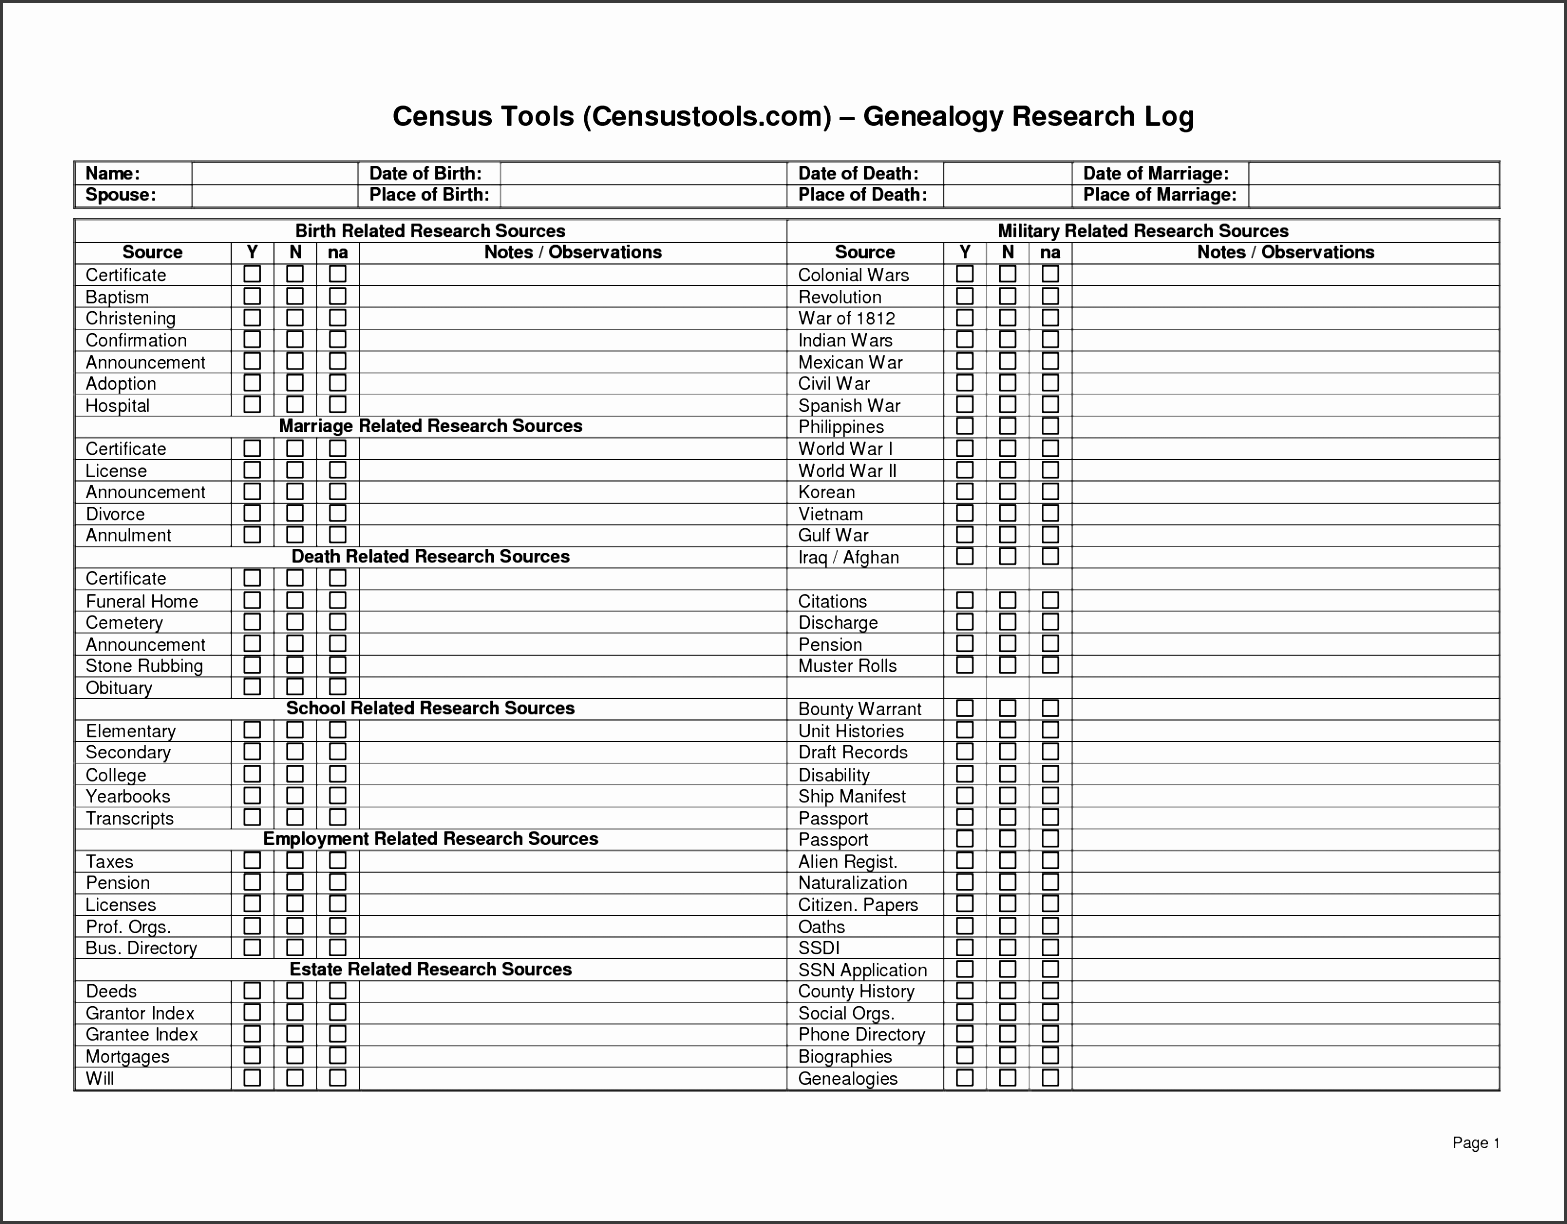 census tools genealogy research log by maclaren1